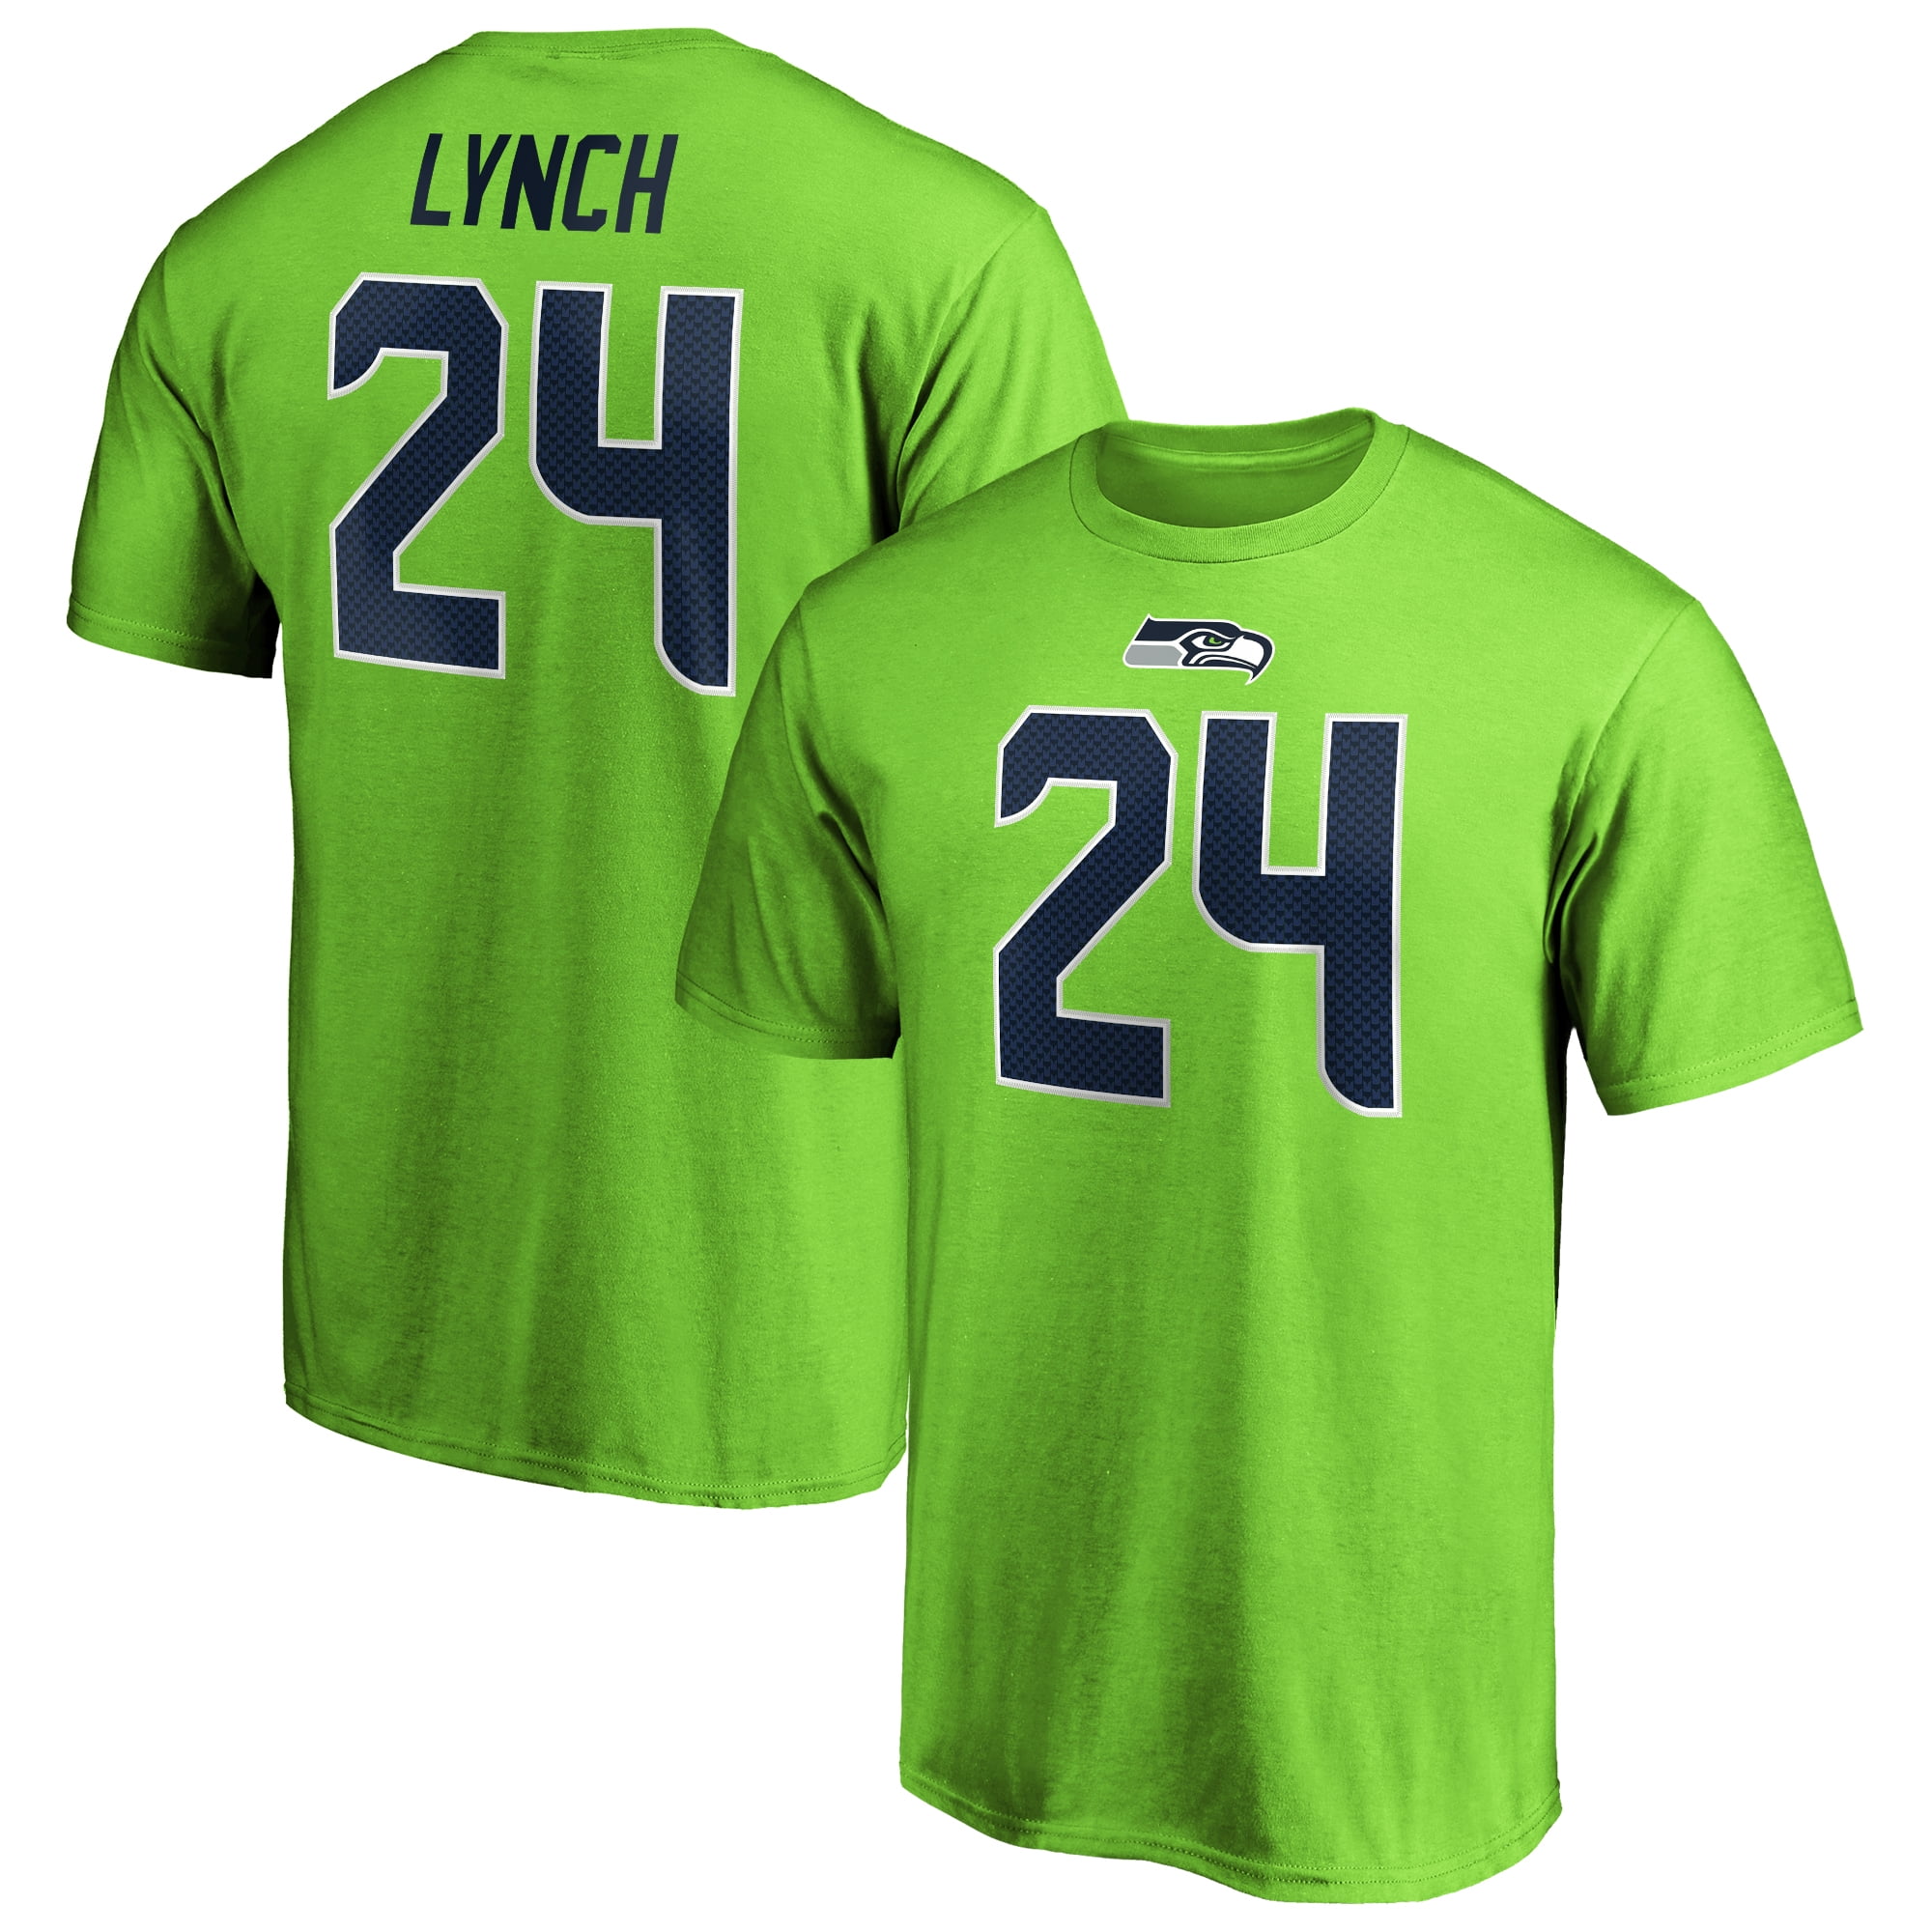 marshawn lynch official jersey